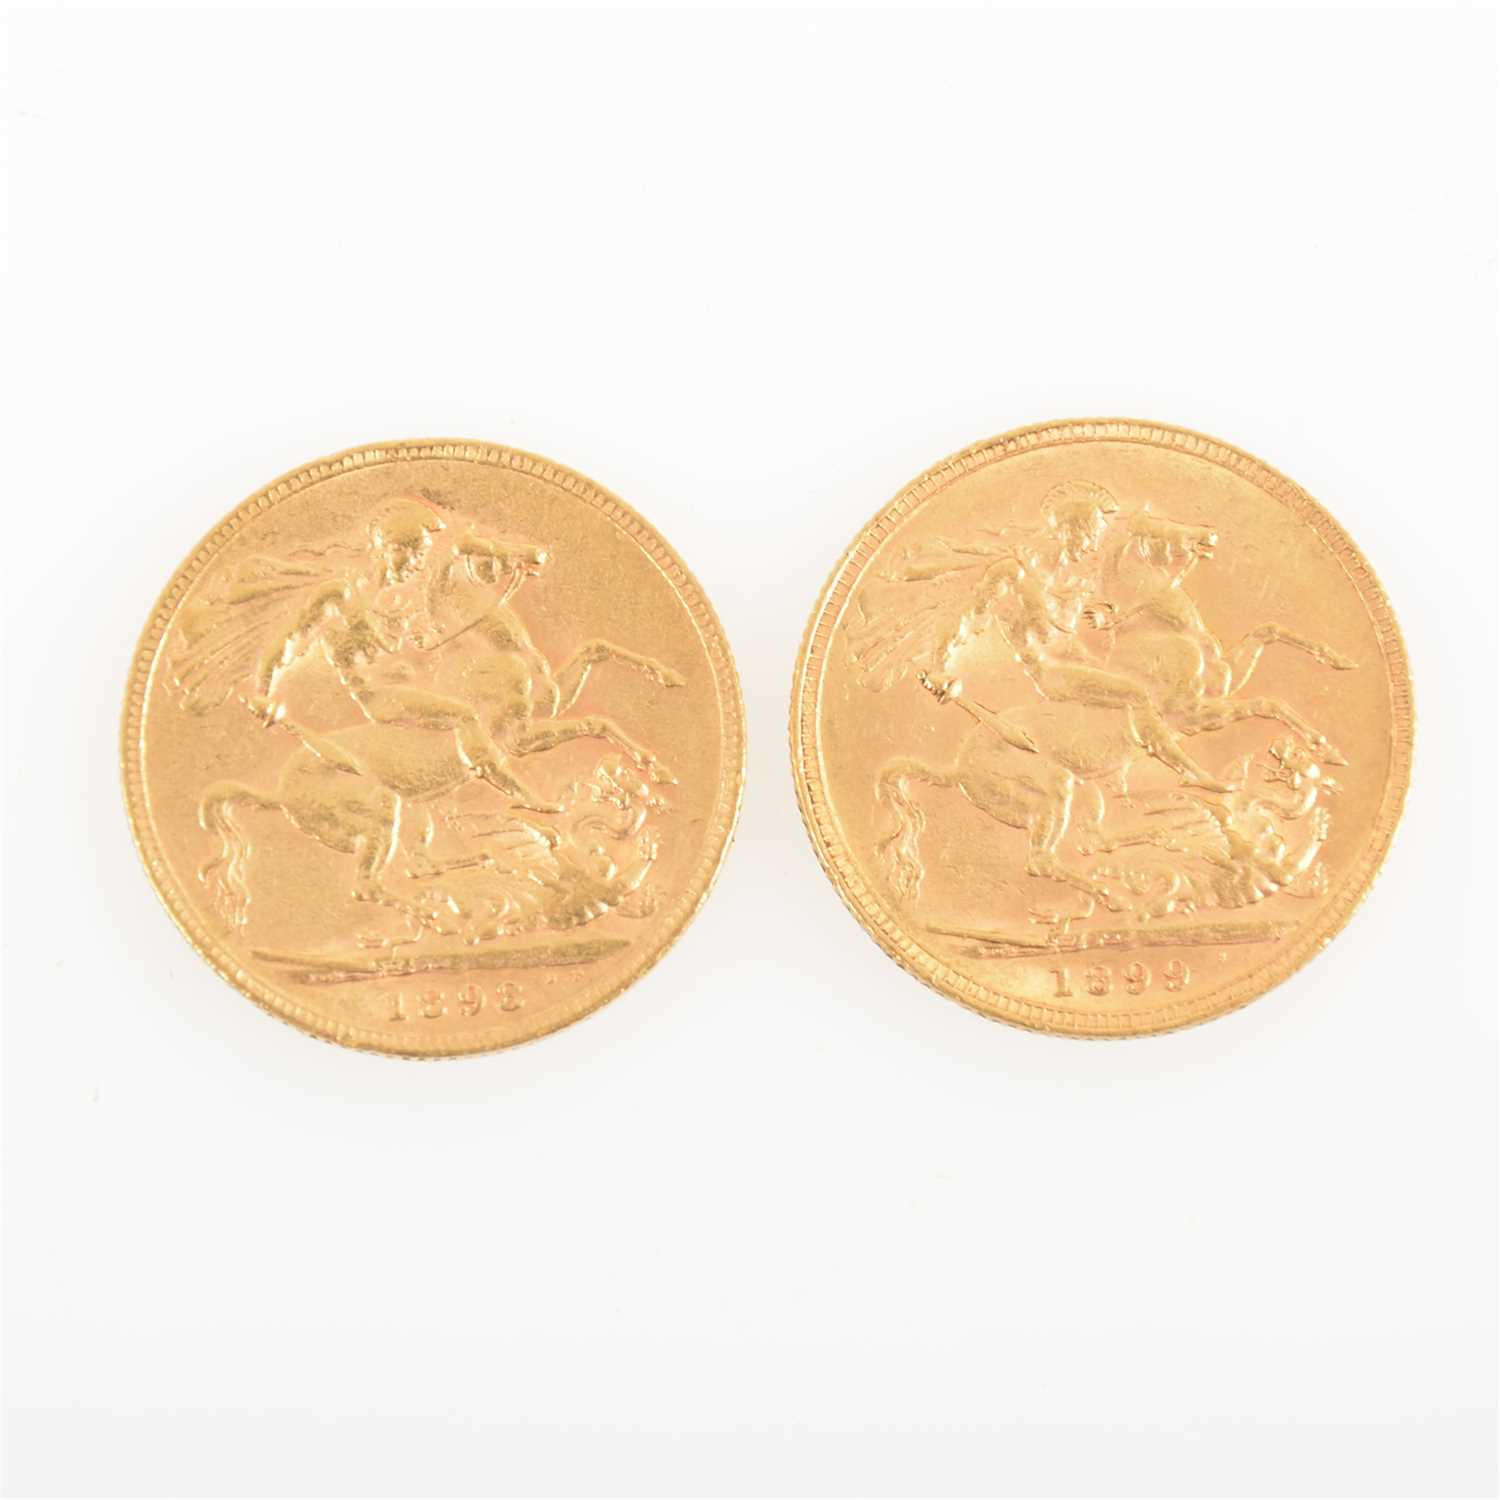 Lot 266 - Two Full Sovereigns - Victoria Veiled Head 1898, 1899